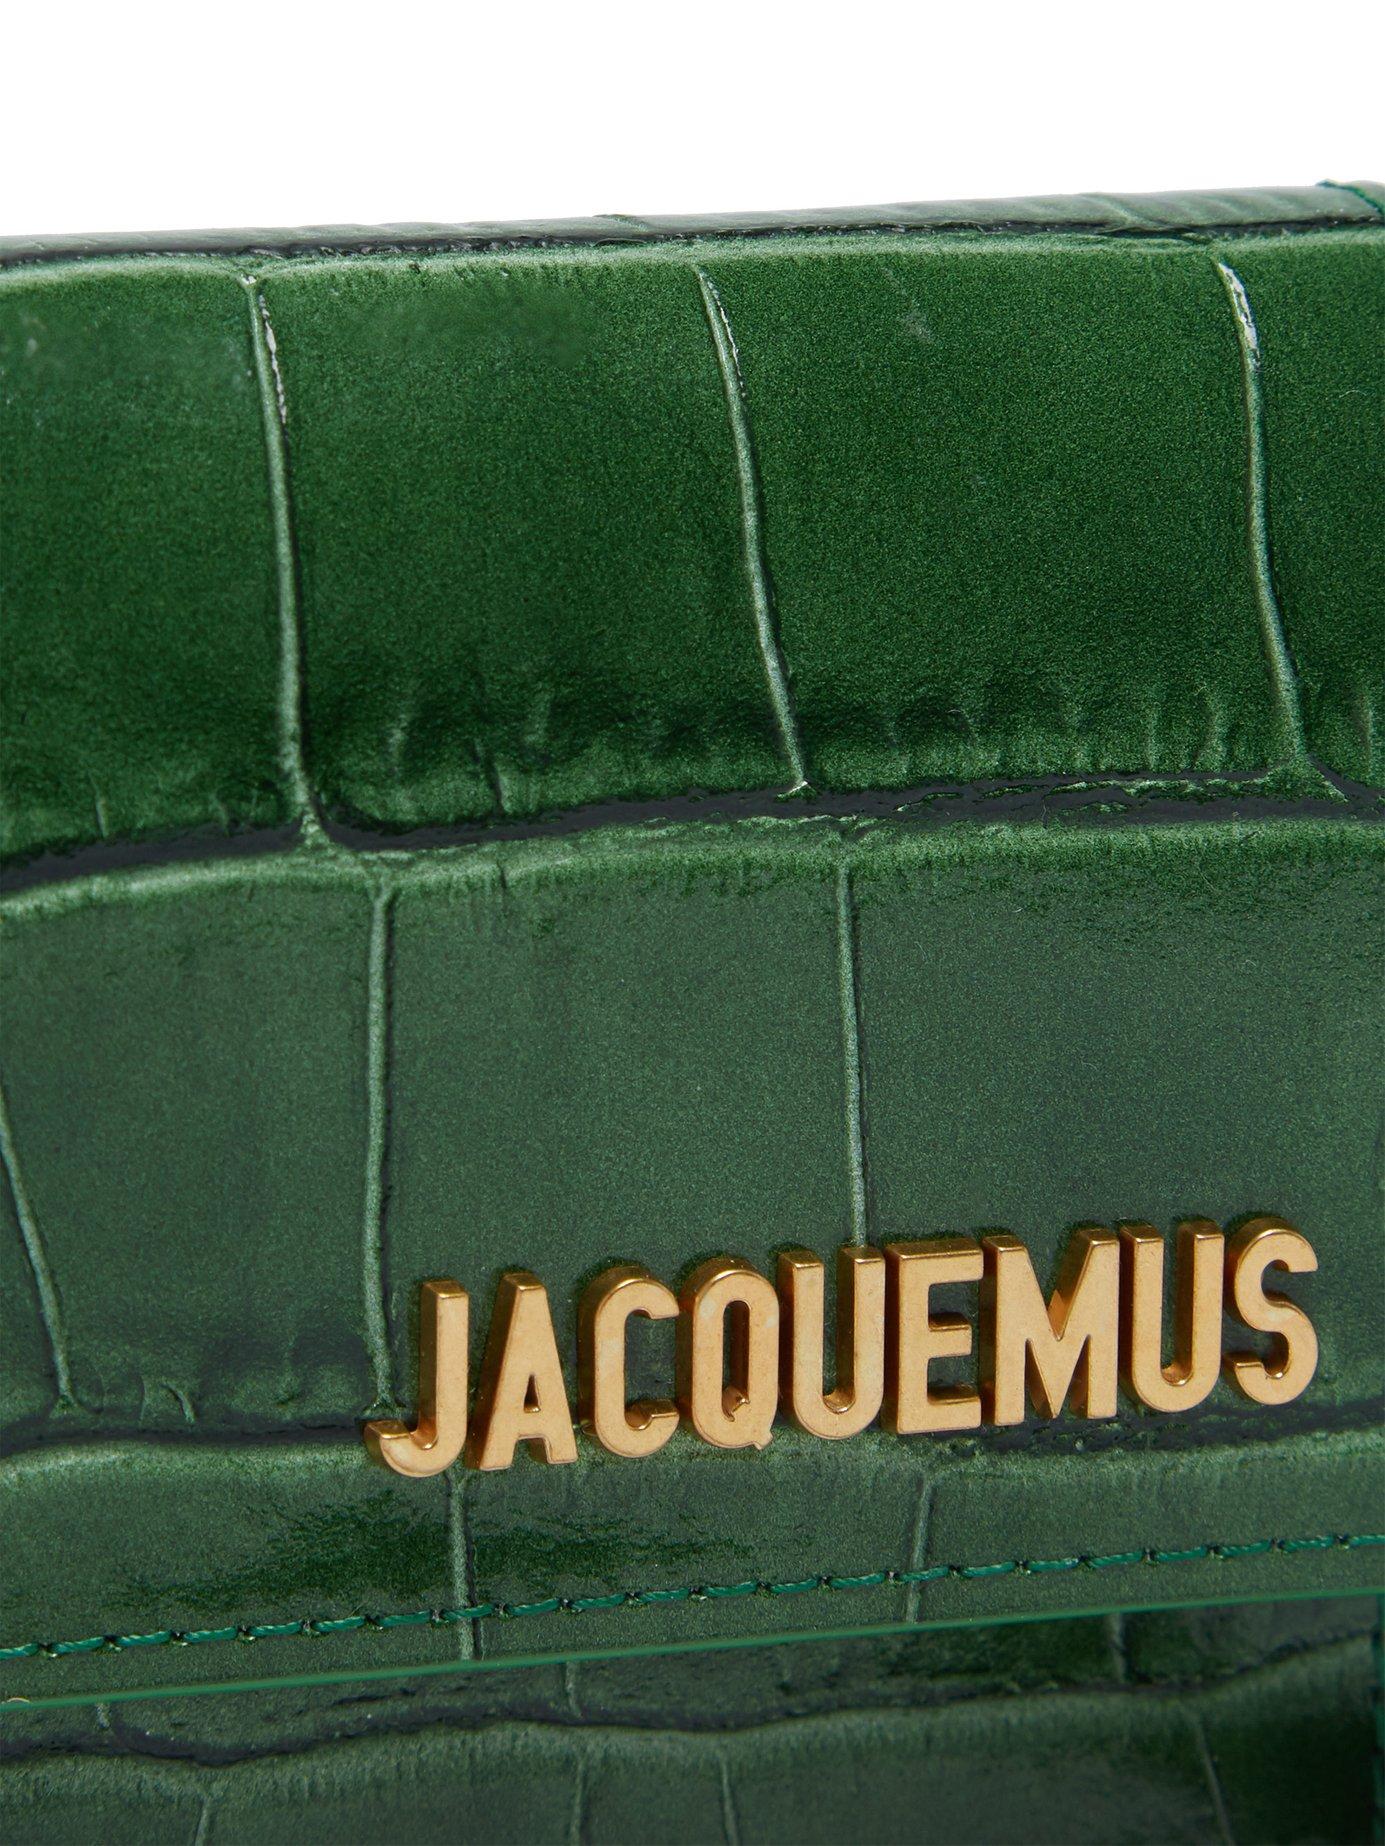 Jacquemus Le Bello Crocodile Effect Leather Shoulder Bag in Green | Lyst